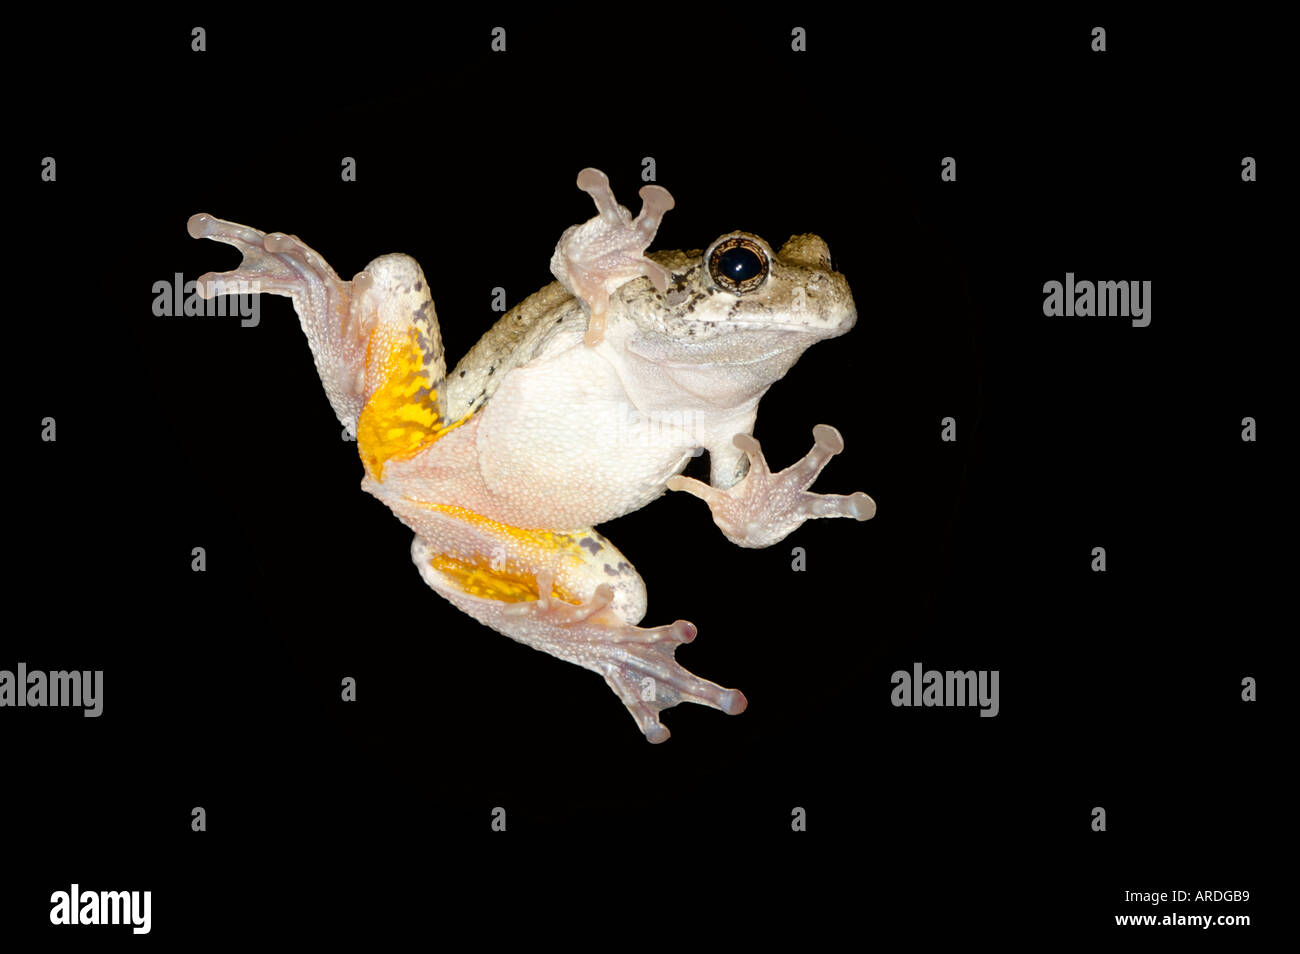 Northern Gray Treefrog tree frog Hyla versicolor perched on a window at night. Stock Photo